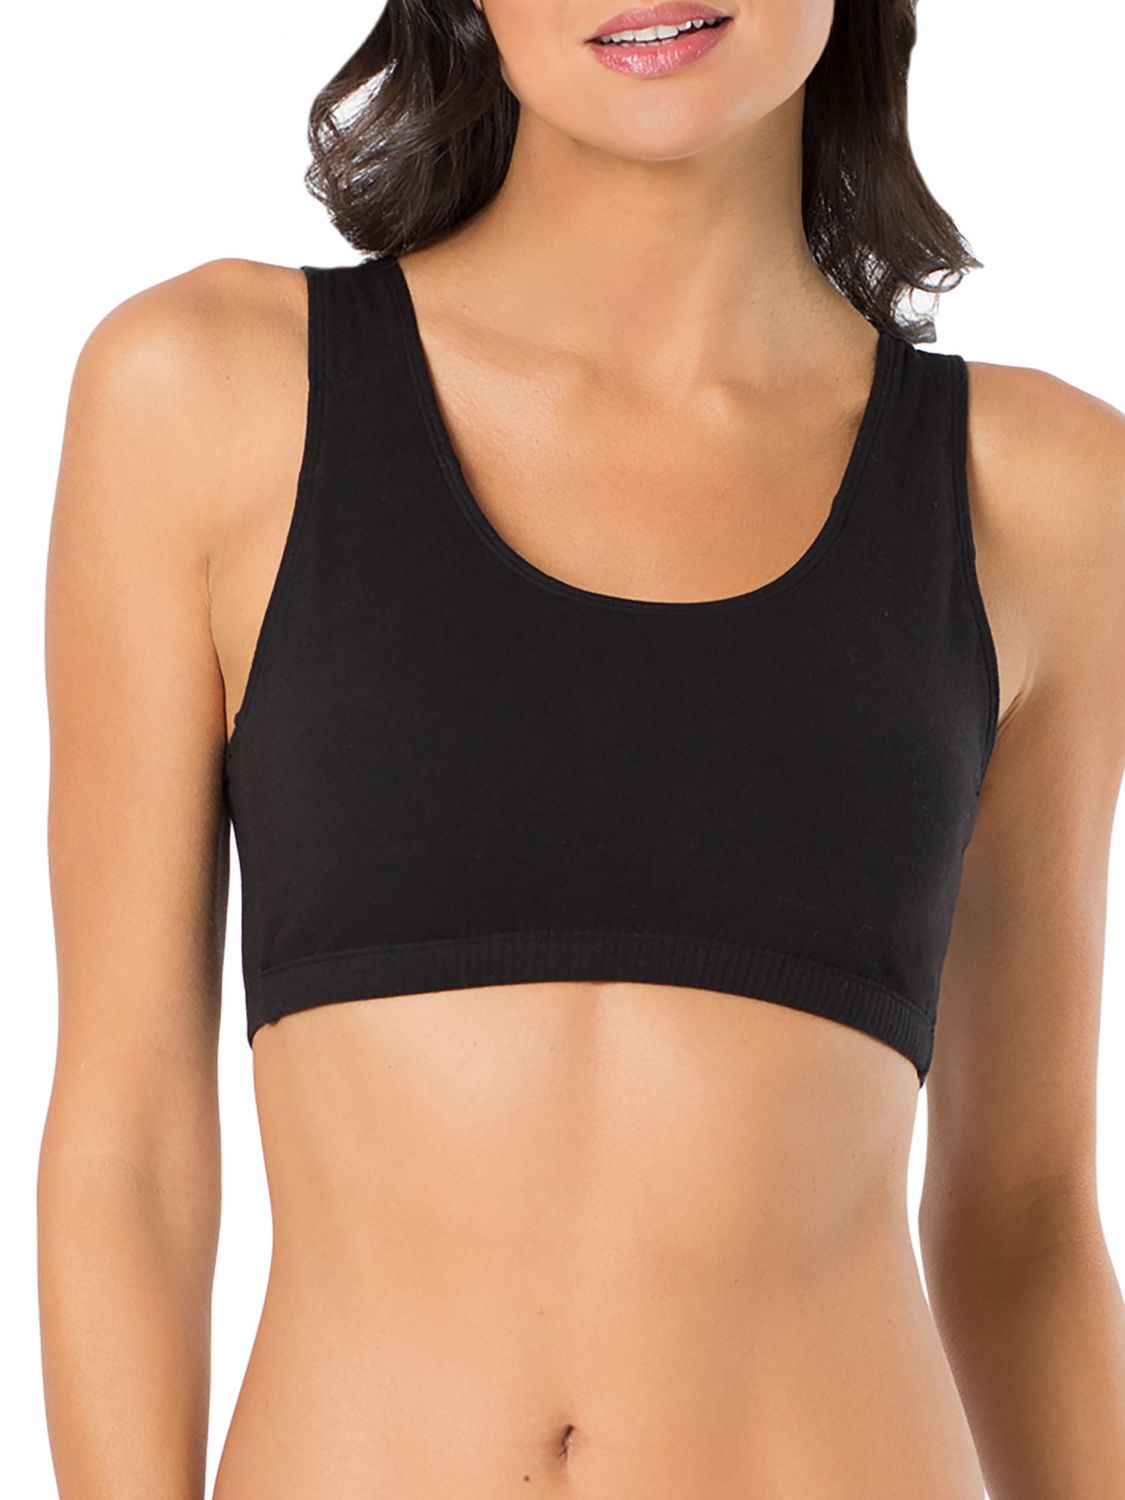 Fruit of the Loom Women's Built Up Tank Style Sports Bra - WF Shopping